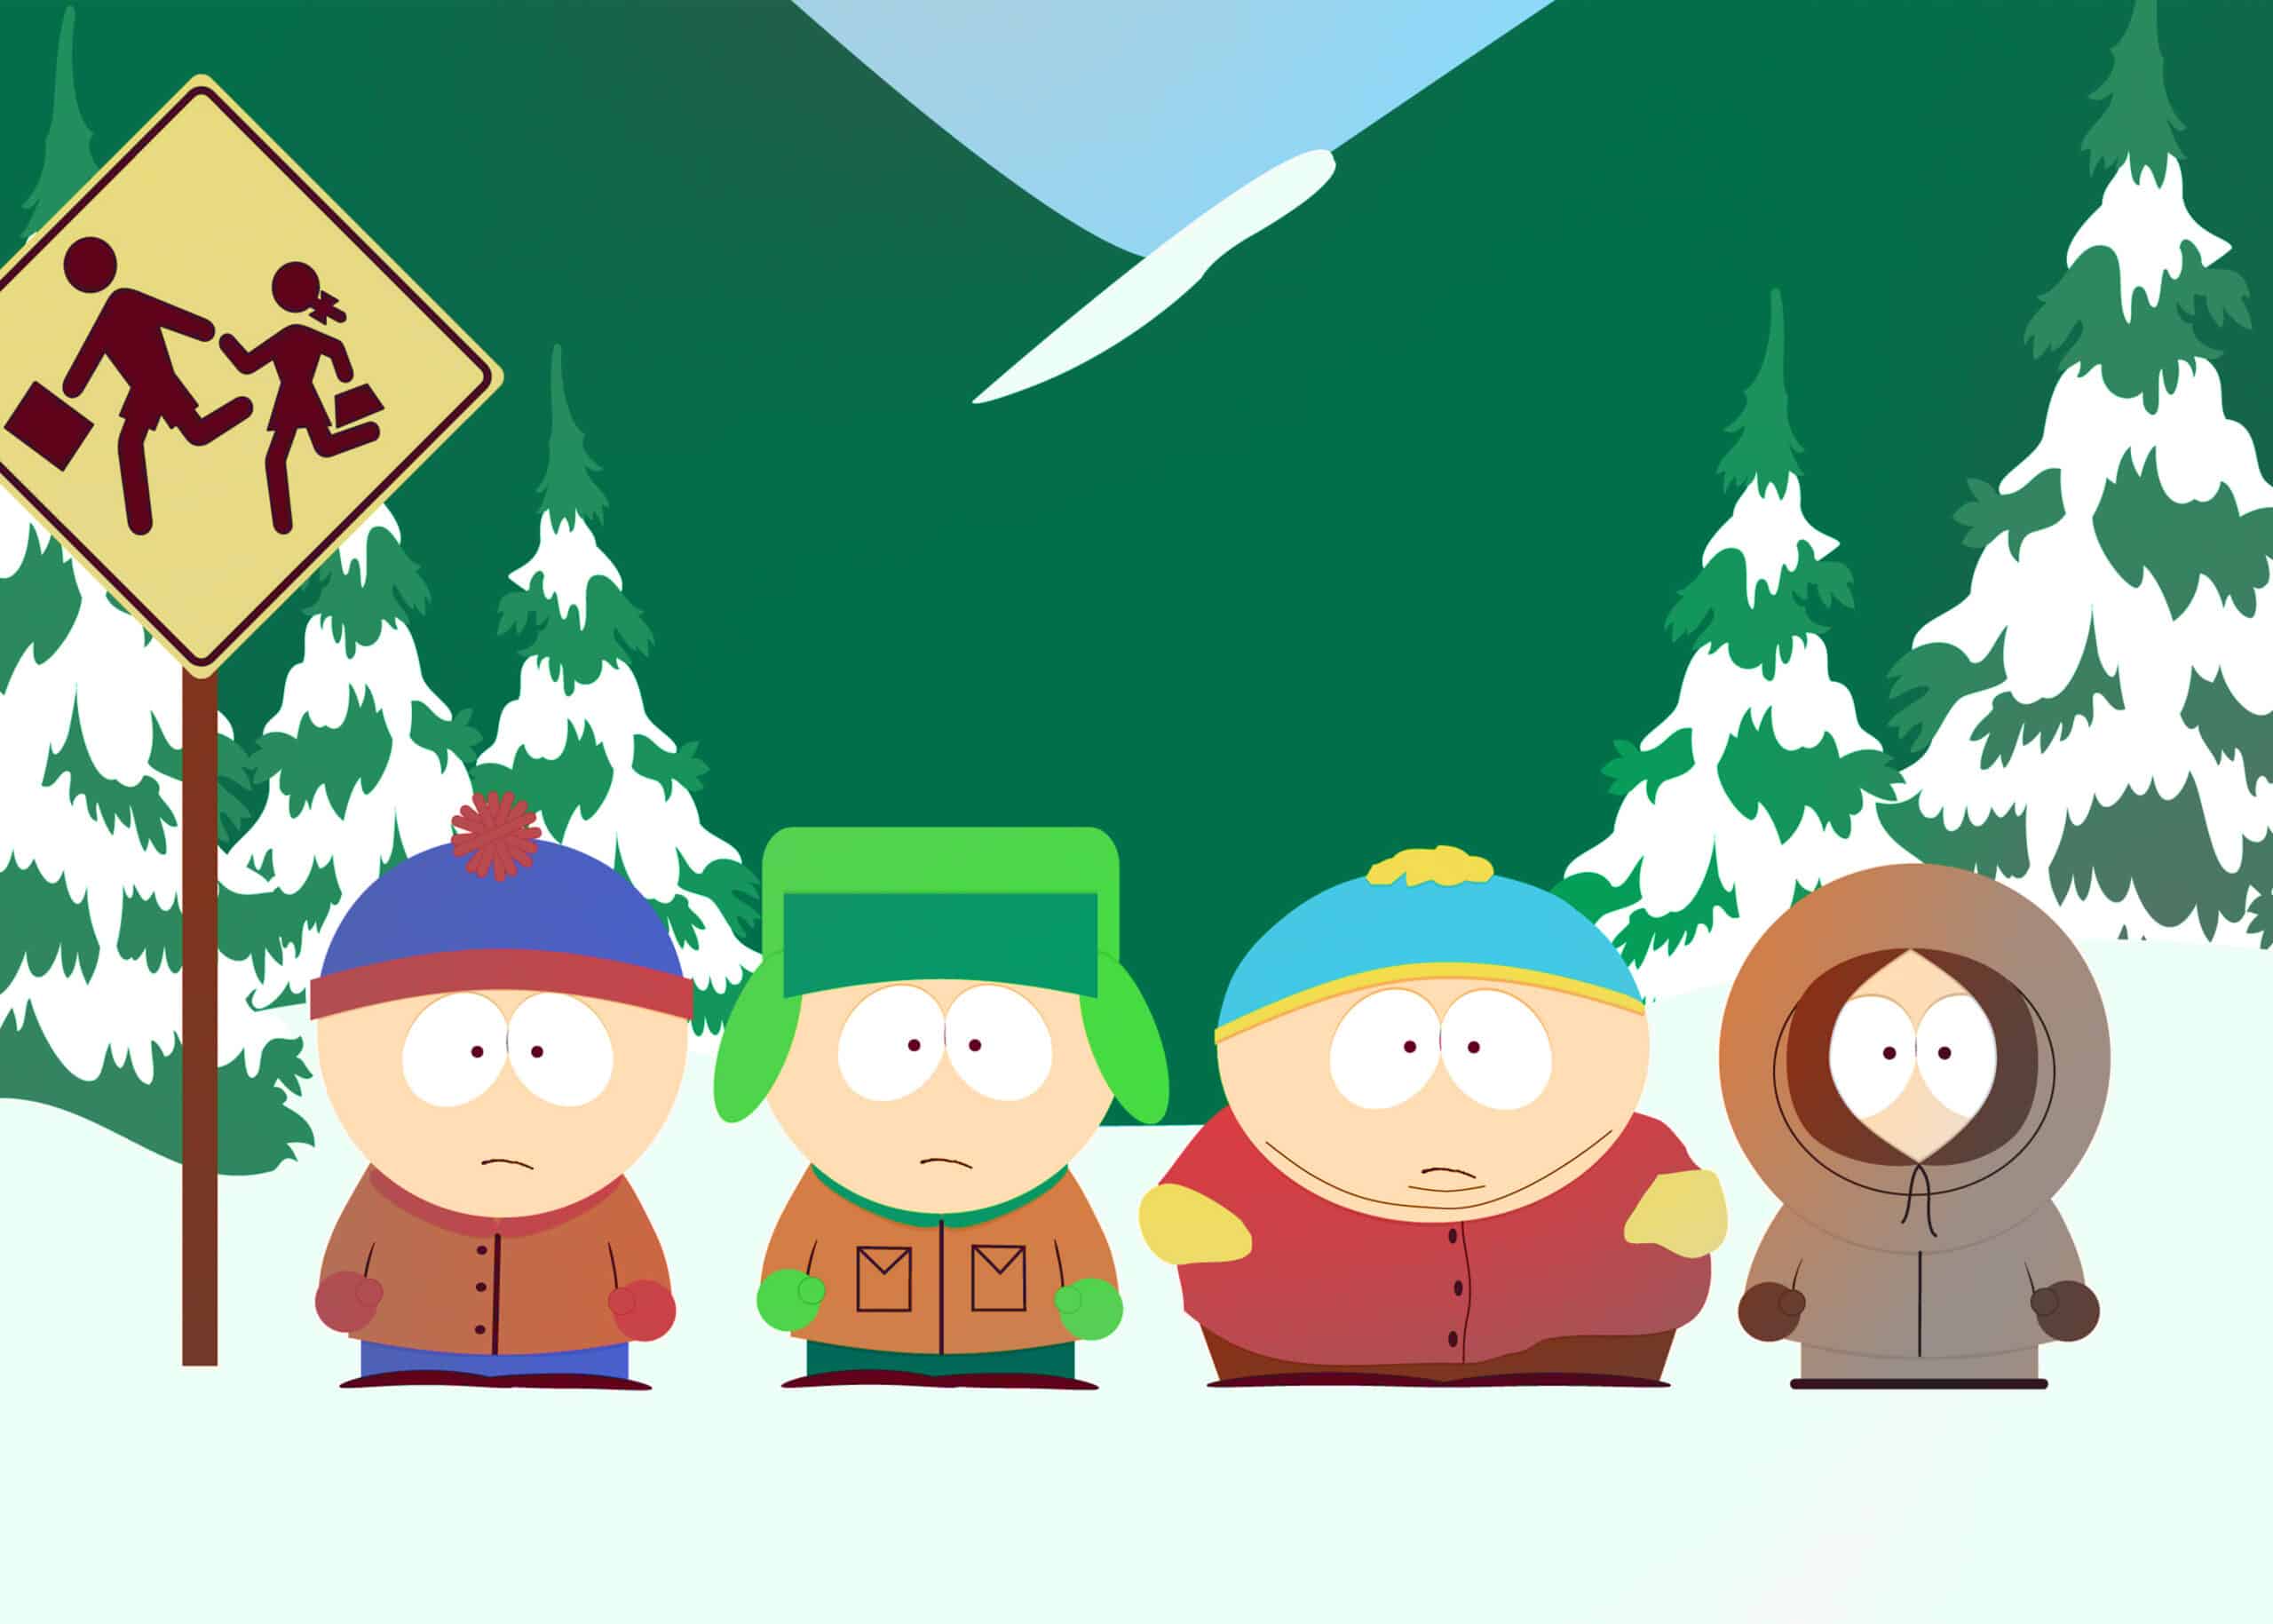 Funniest and Best South Park Episodes